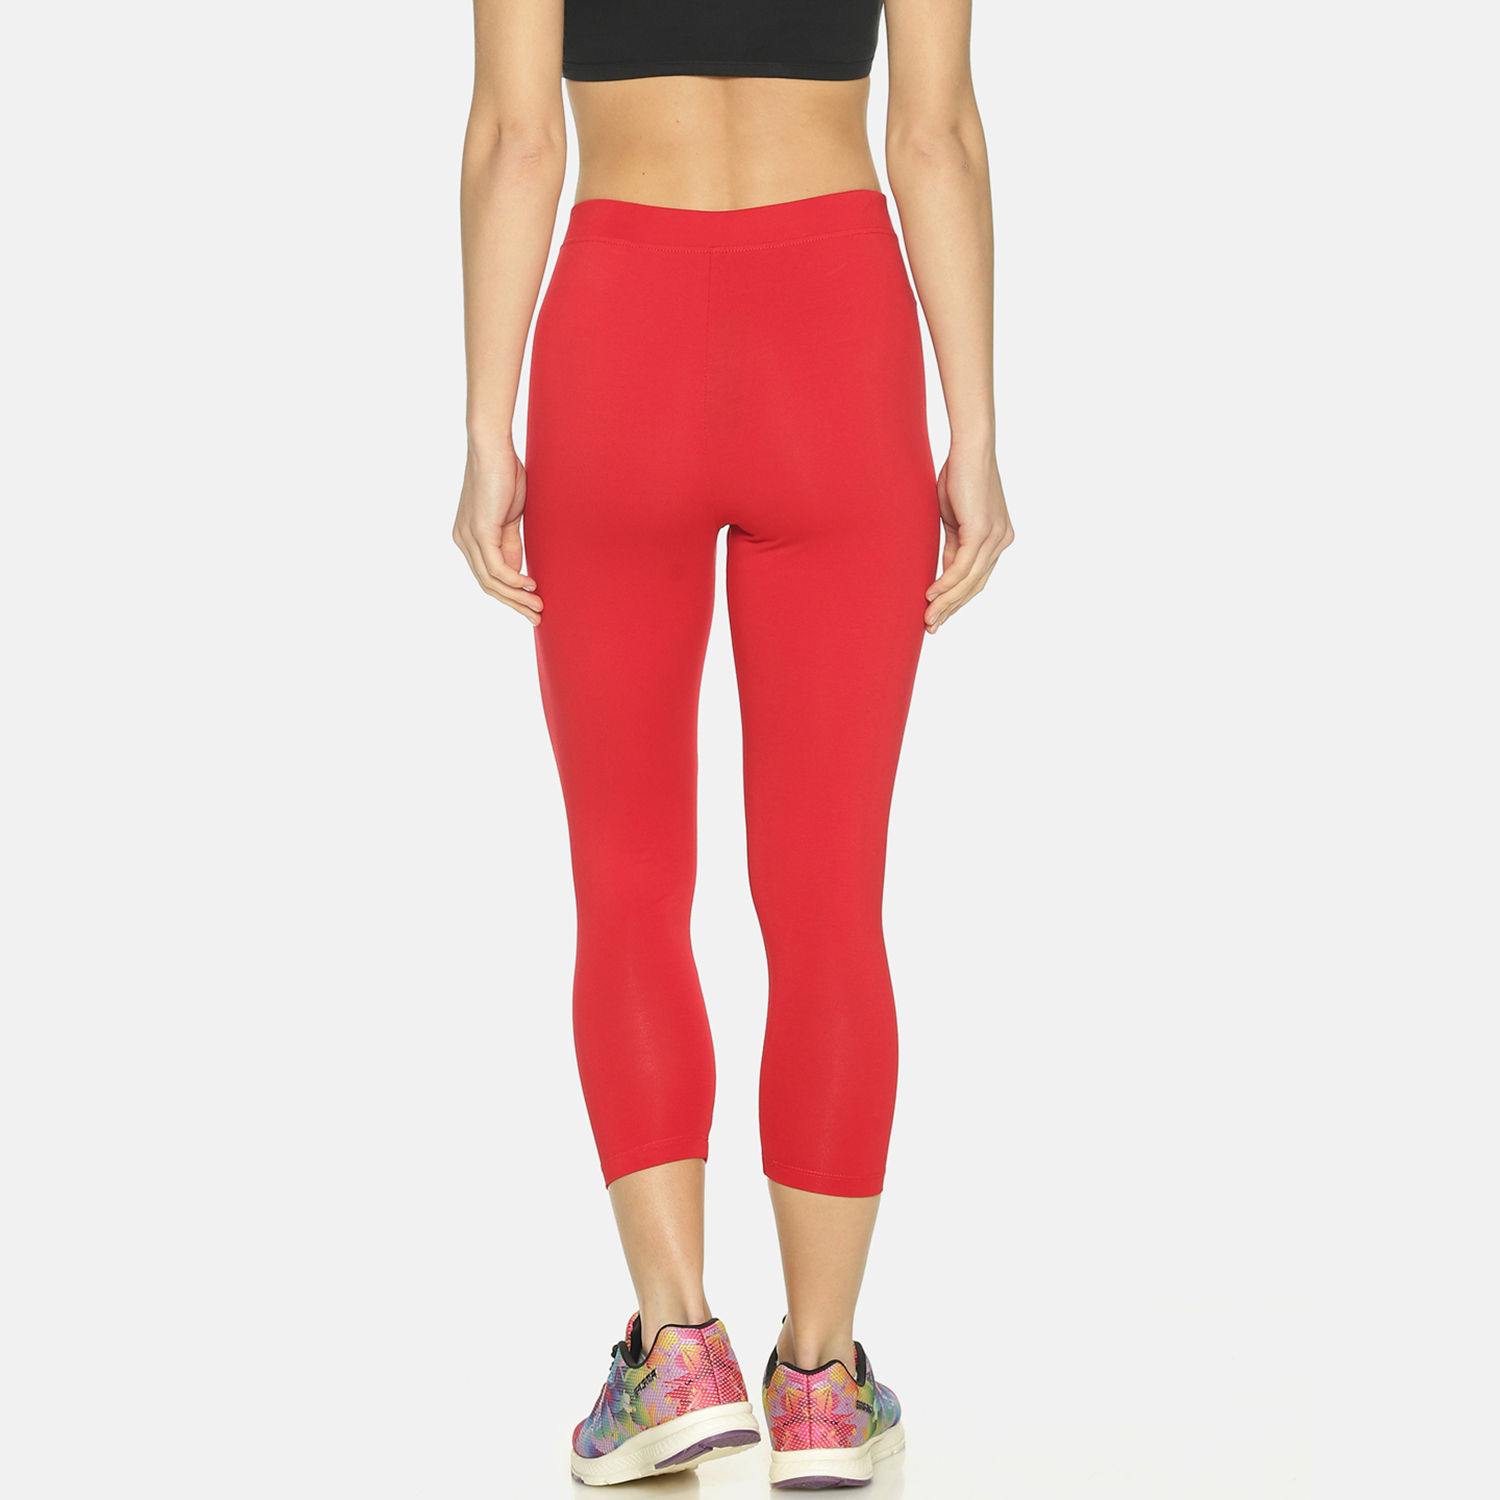 3/4 Length Twin Birds Legging Coral Flame Online Shopping At Lowest Price  In India With Discounts